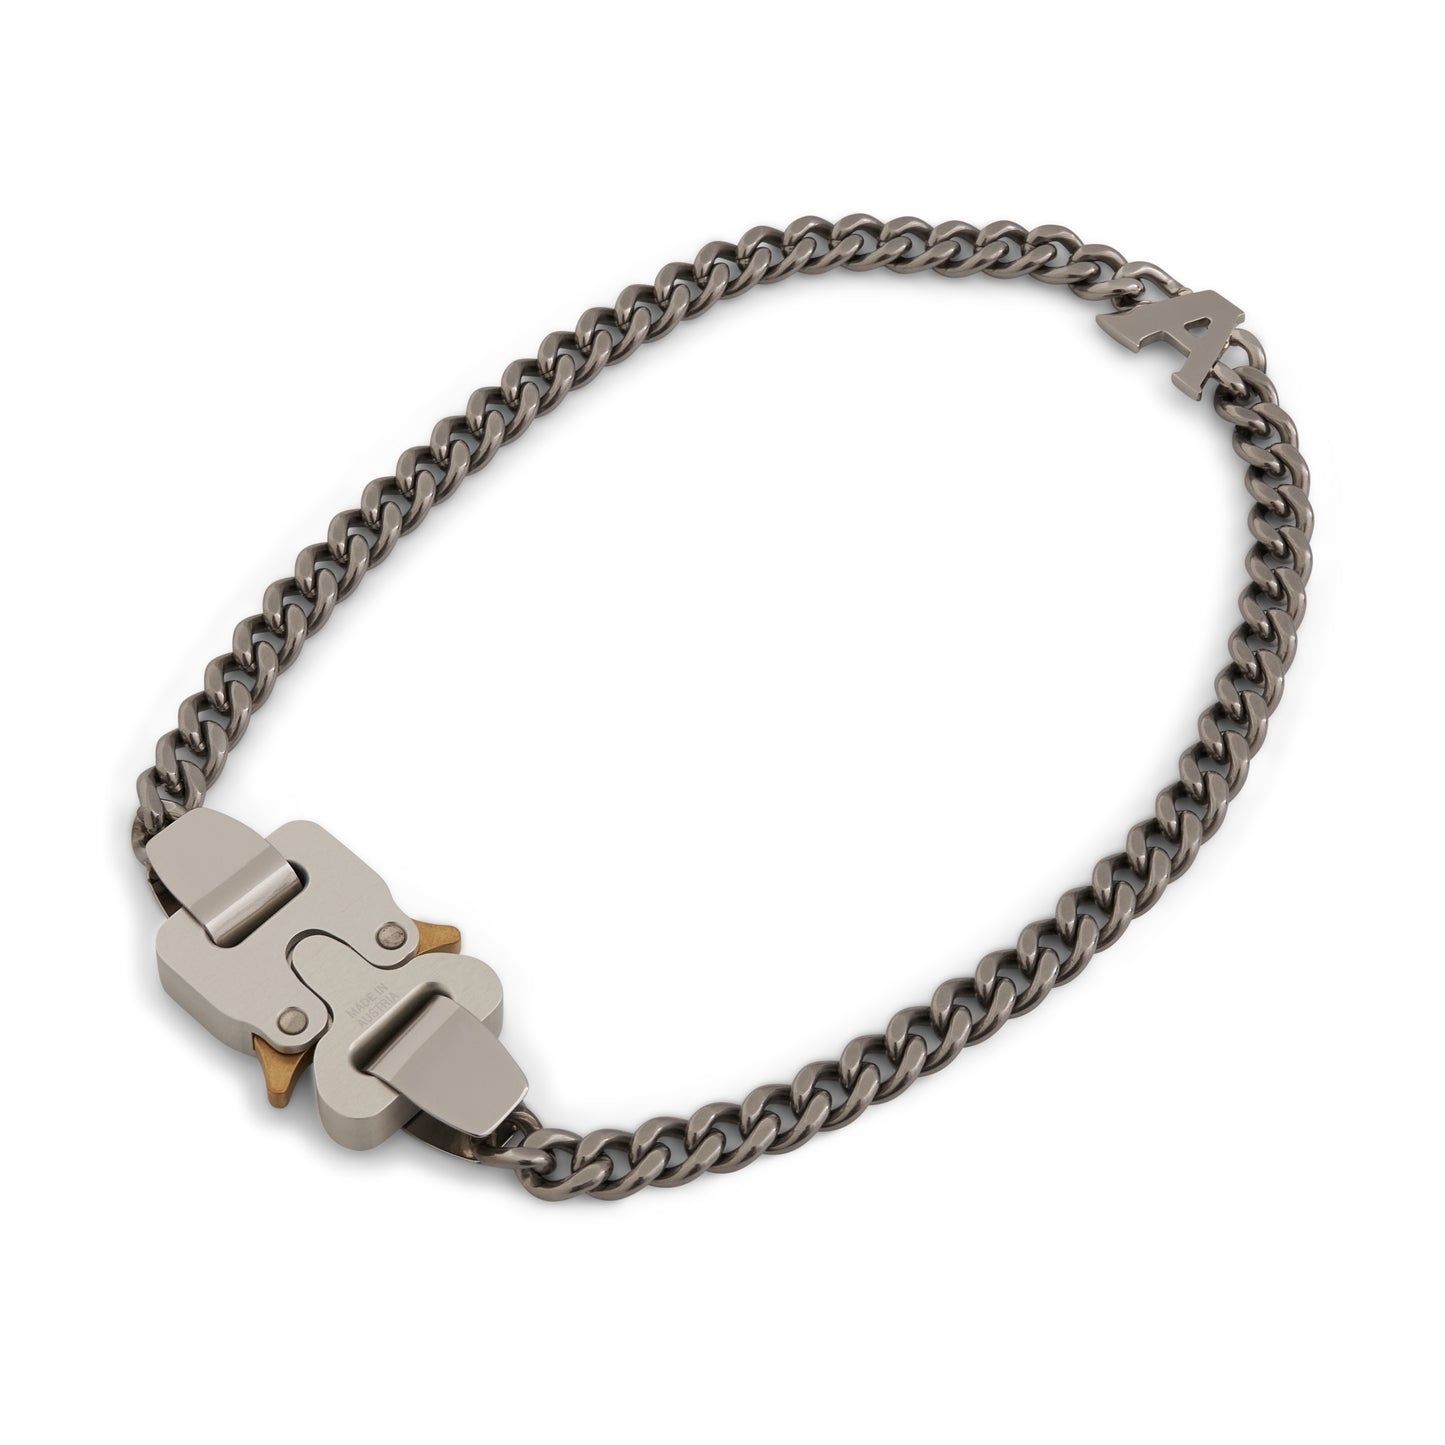 Buckle Necklace with Charm in Silver